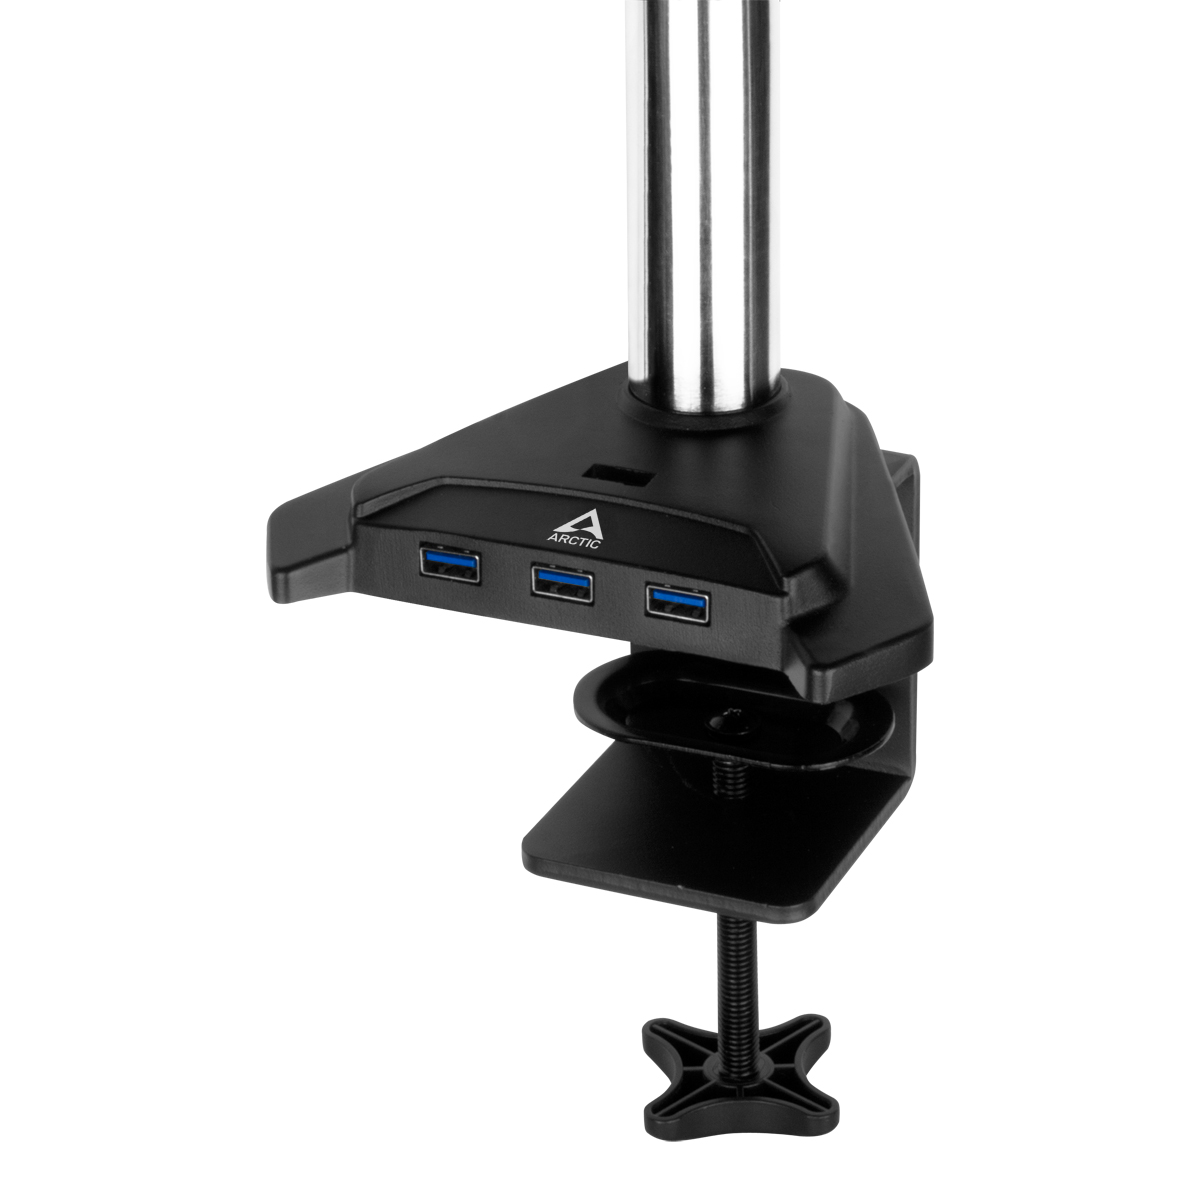 Desk Mount Monitor Arm with SuperSpeed USB Hub ARCTIC Z1 Pro (Gen 3) Detail View Table Clamp